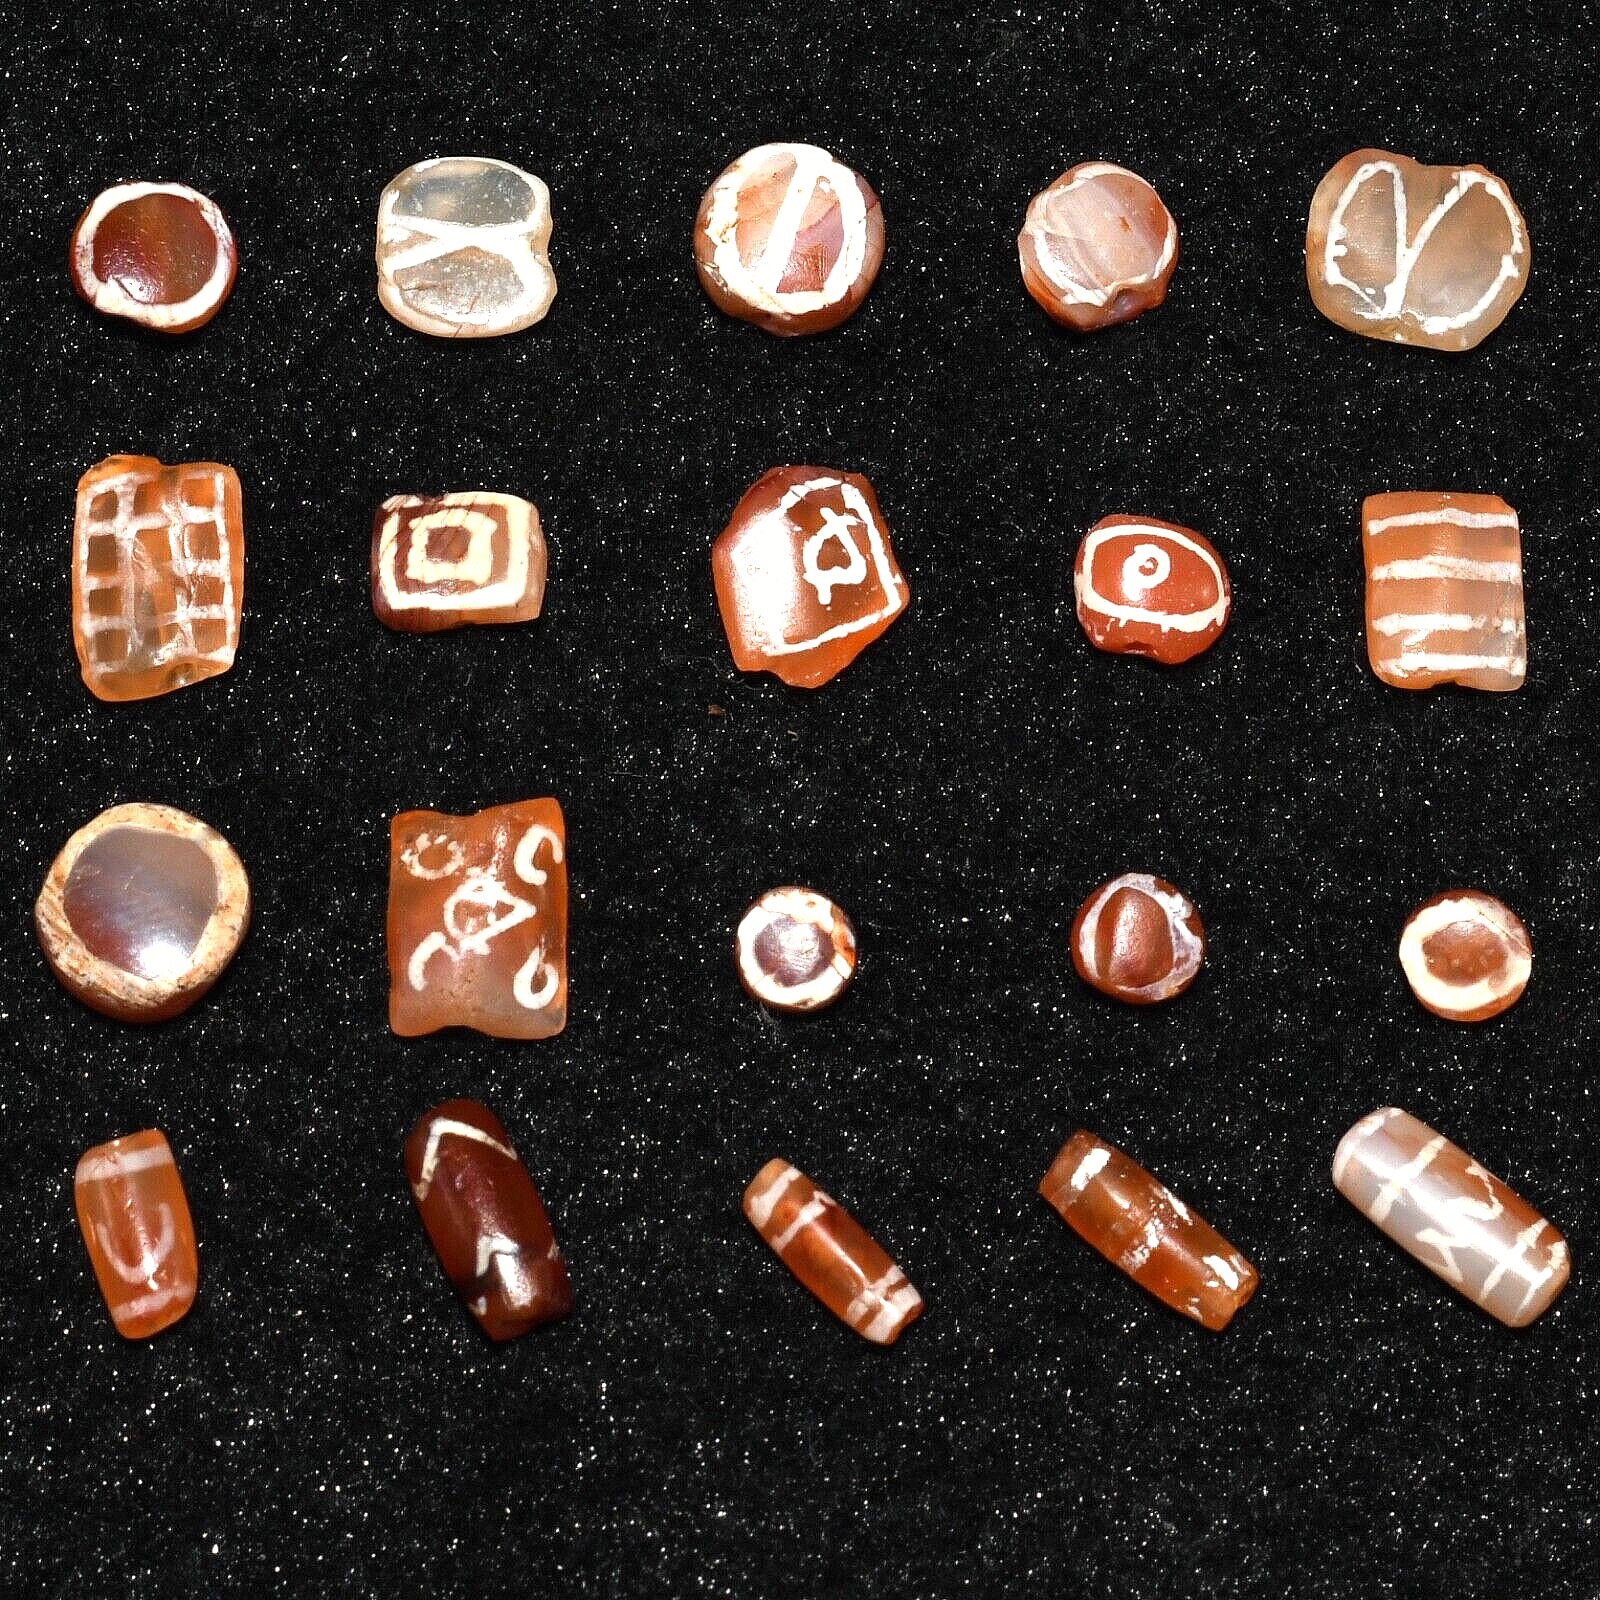 20 Ancient Etched Carnelian Longevity Luk Mik Stone Beads in very Good Condition